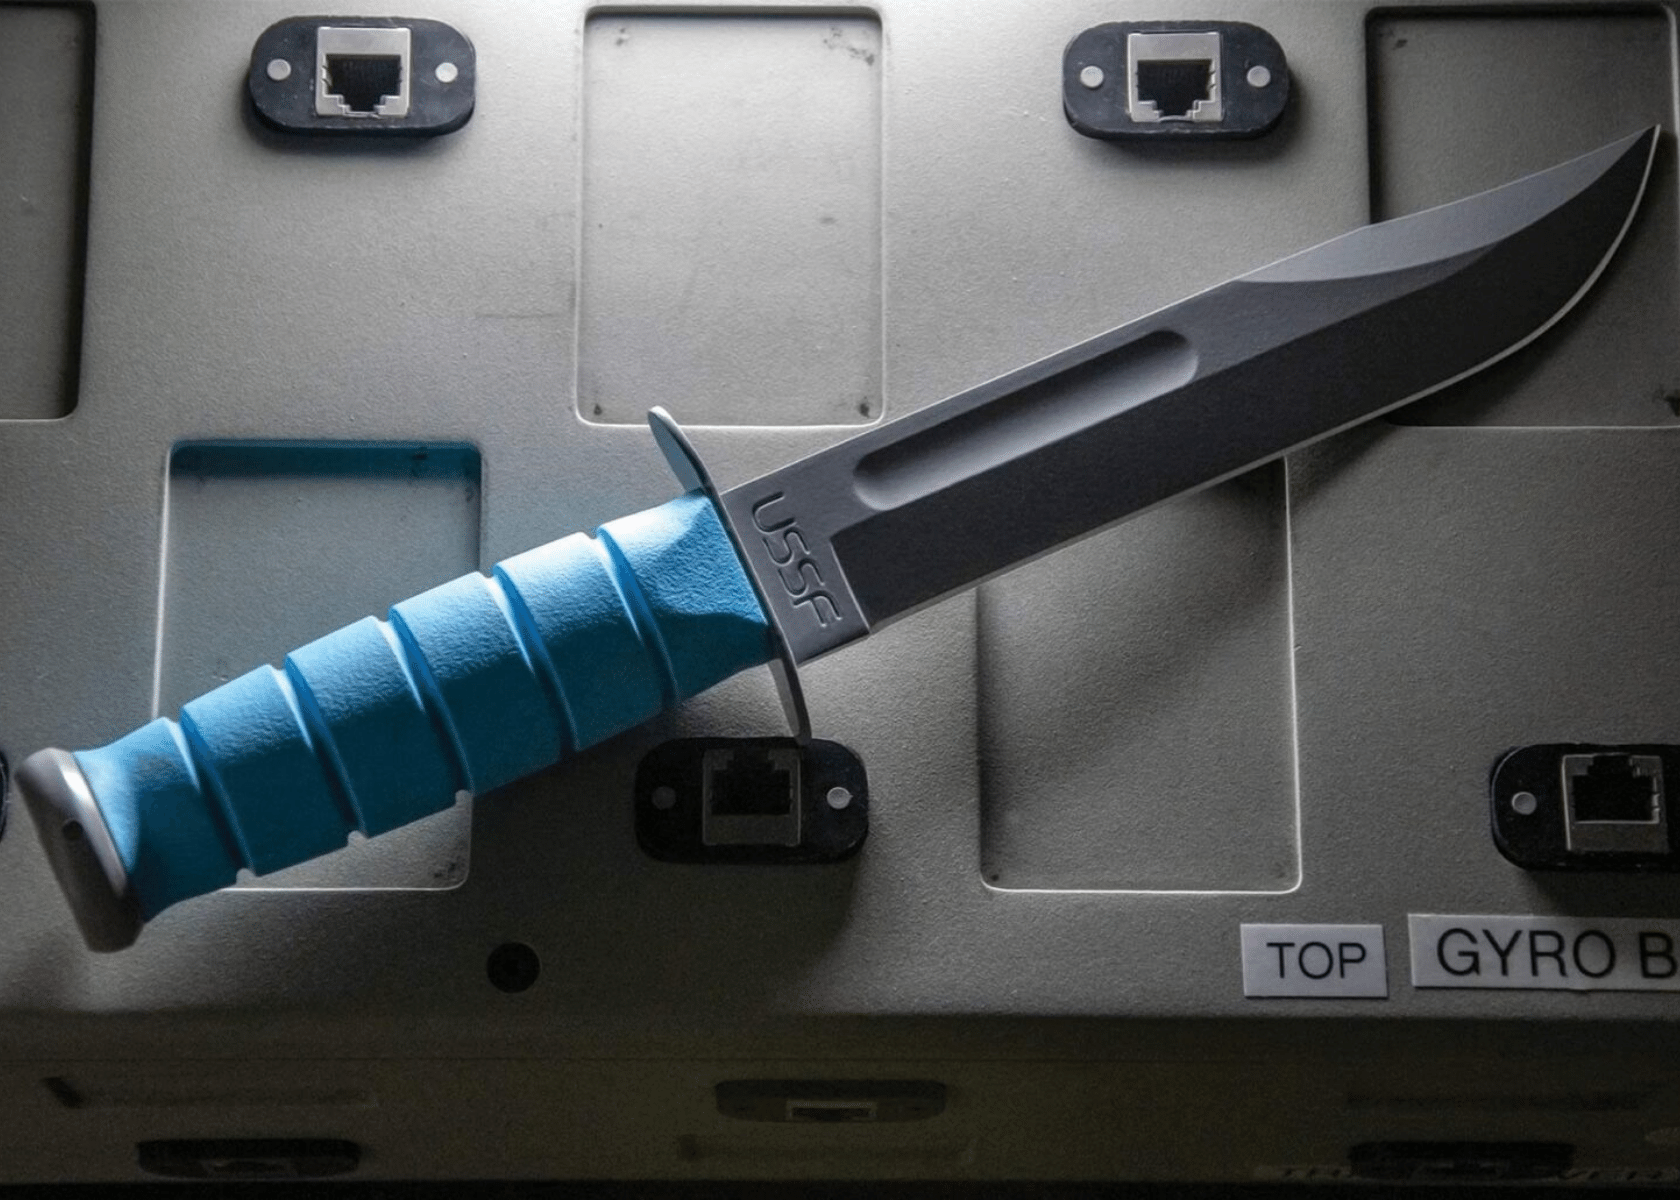 A version of the KA-BAR fighting knife with a blue handle on a cargo crate.